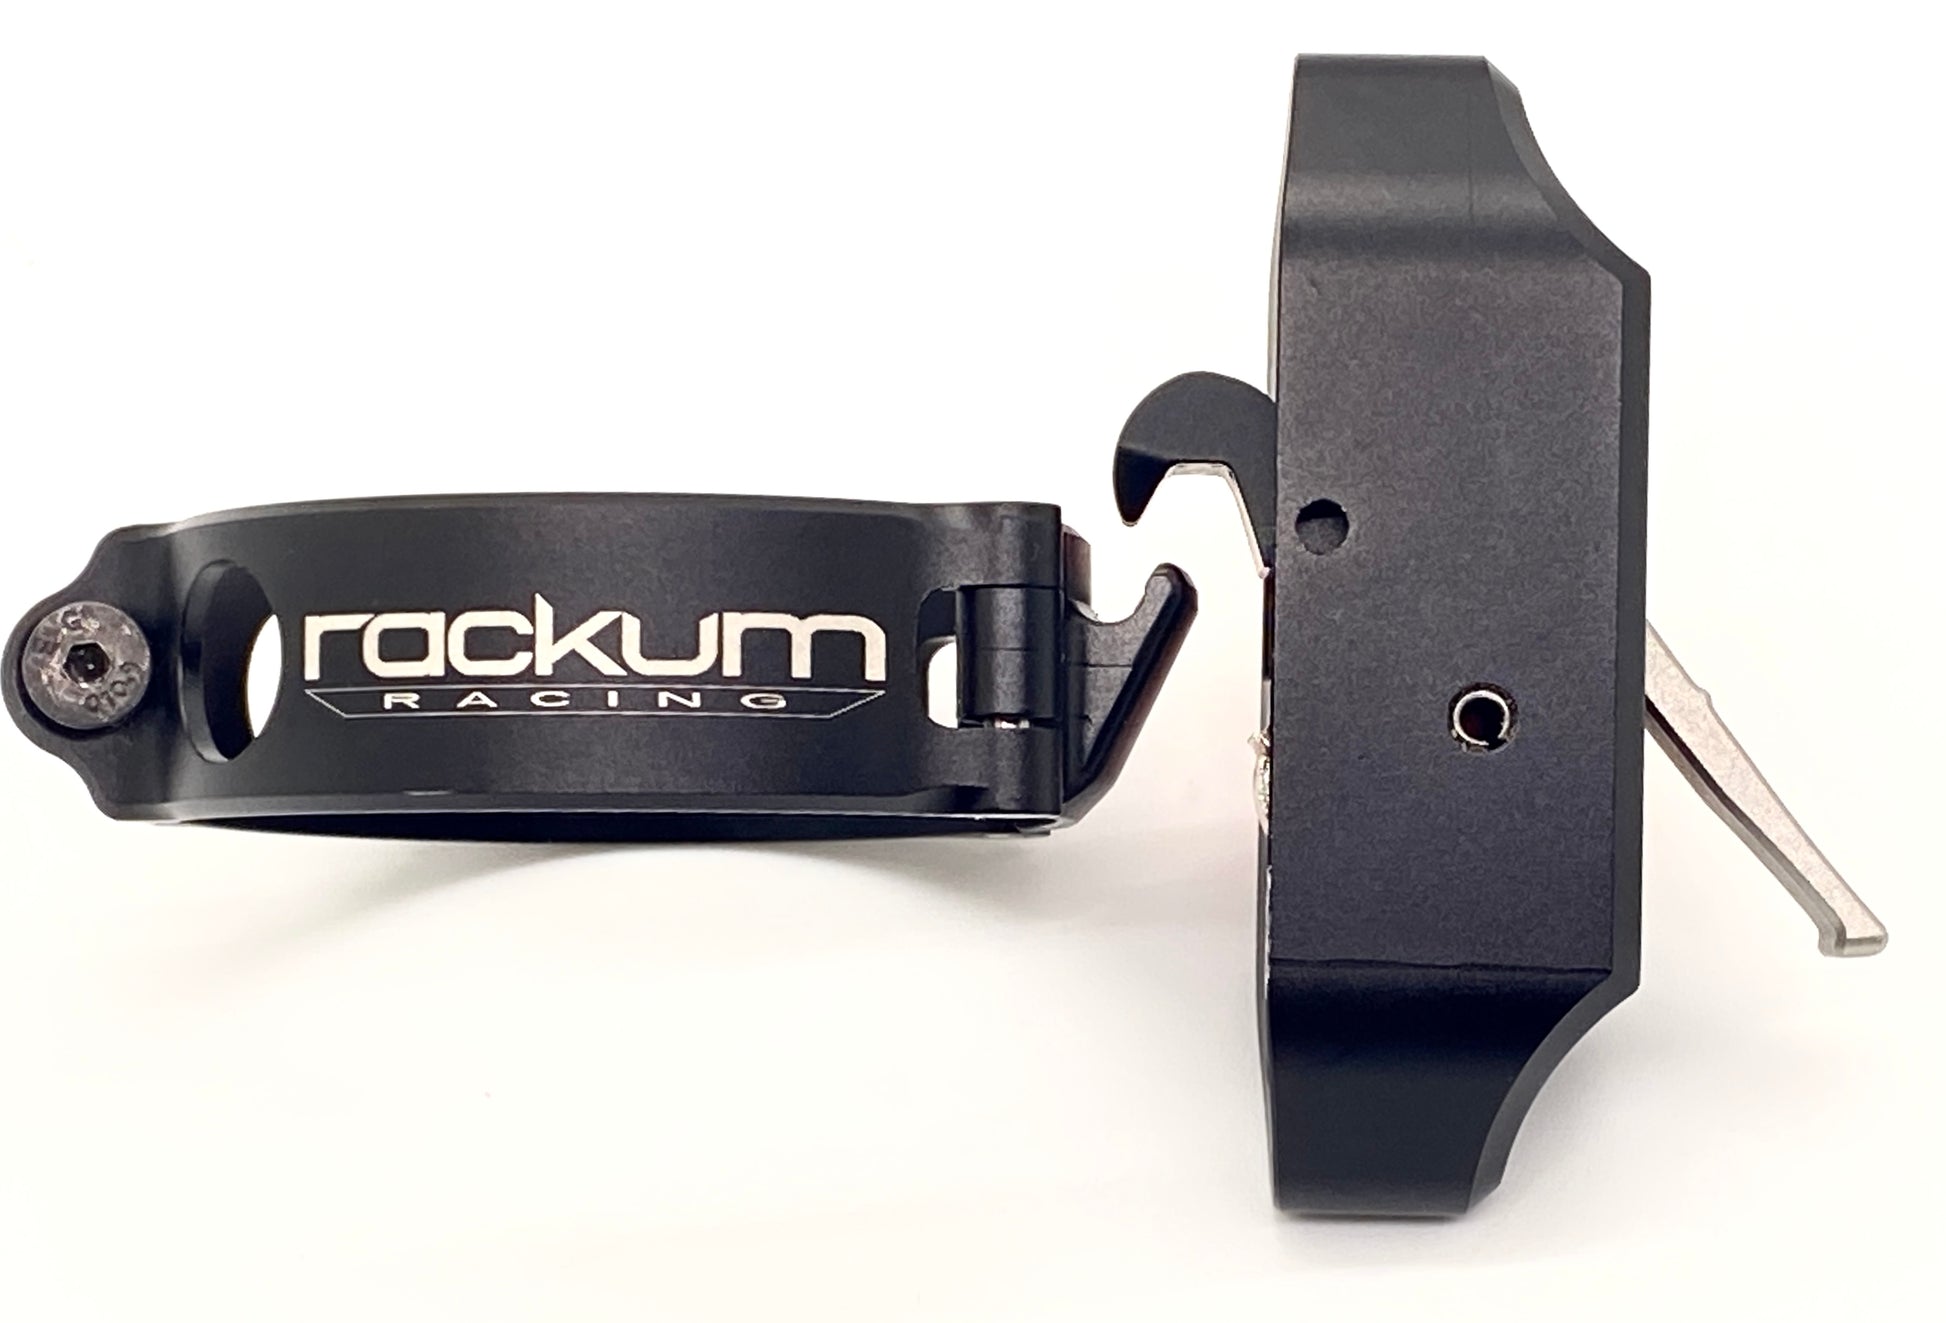 Motocross holeshot device. Rackum Racing ForkLocker is a holeshot device that allowd you to set it yourself. Practicing more with your device allows you to get out in front of your competition.